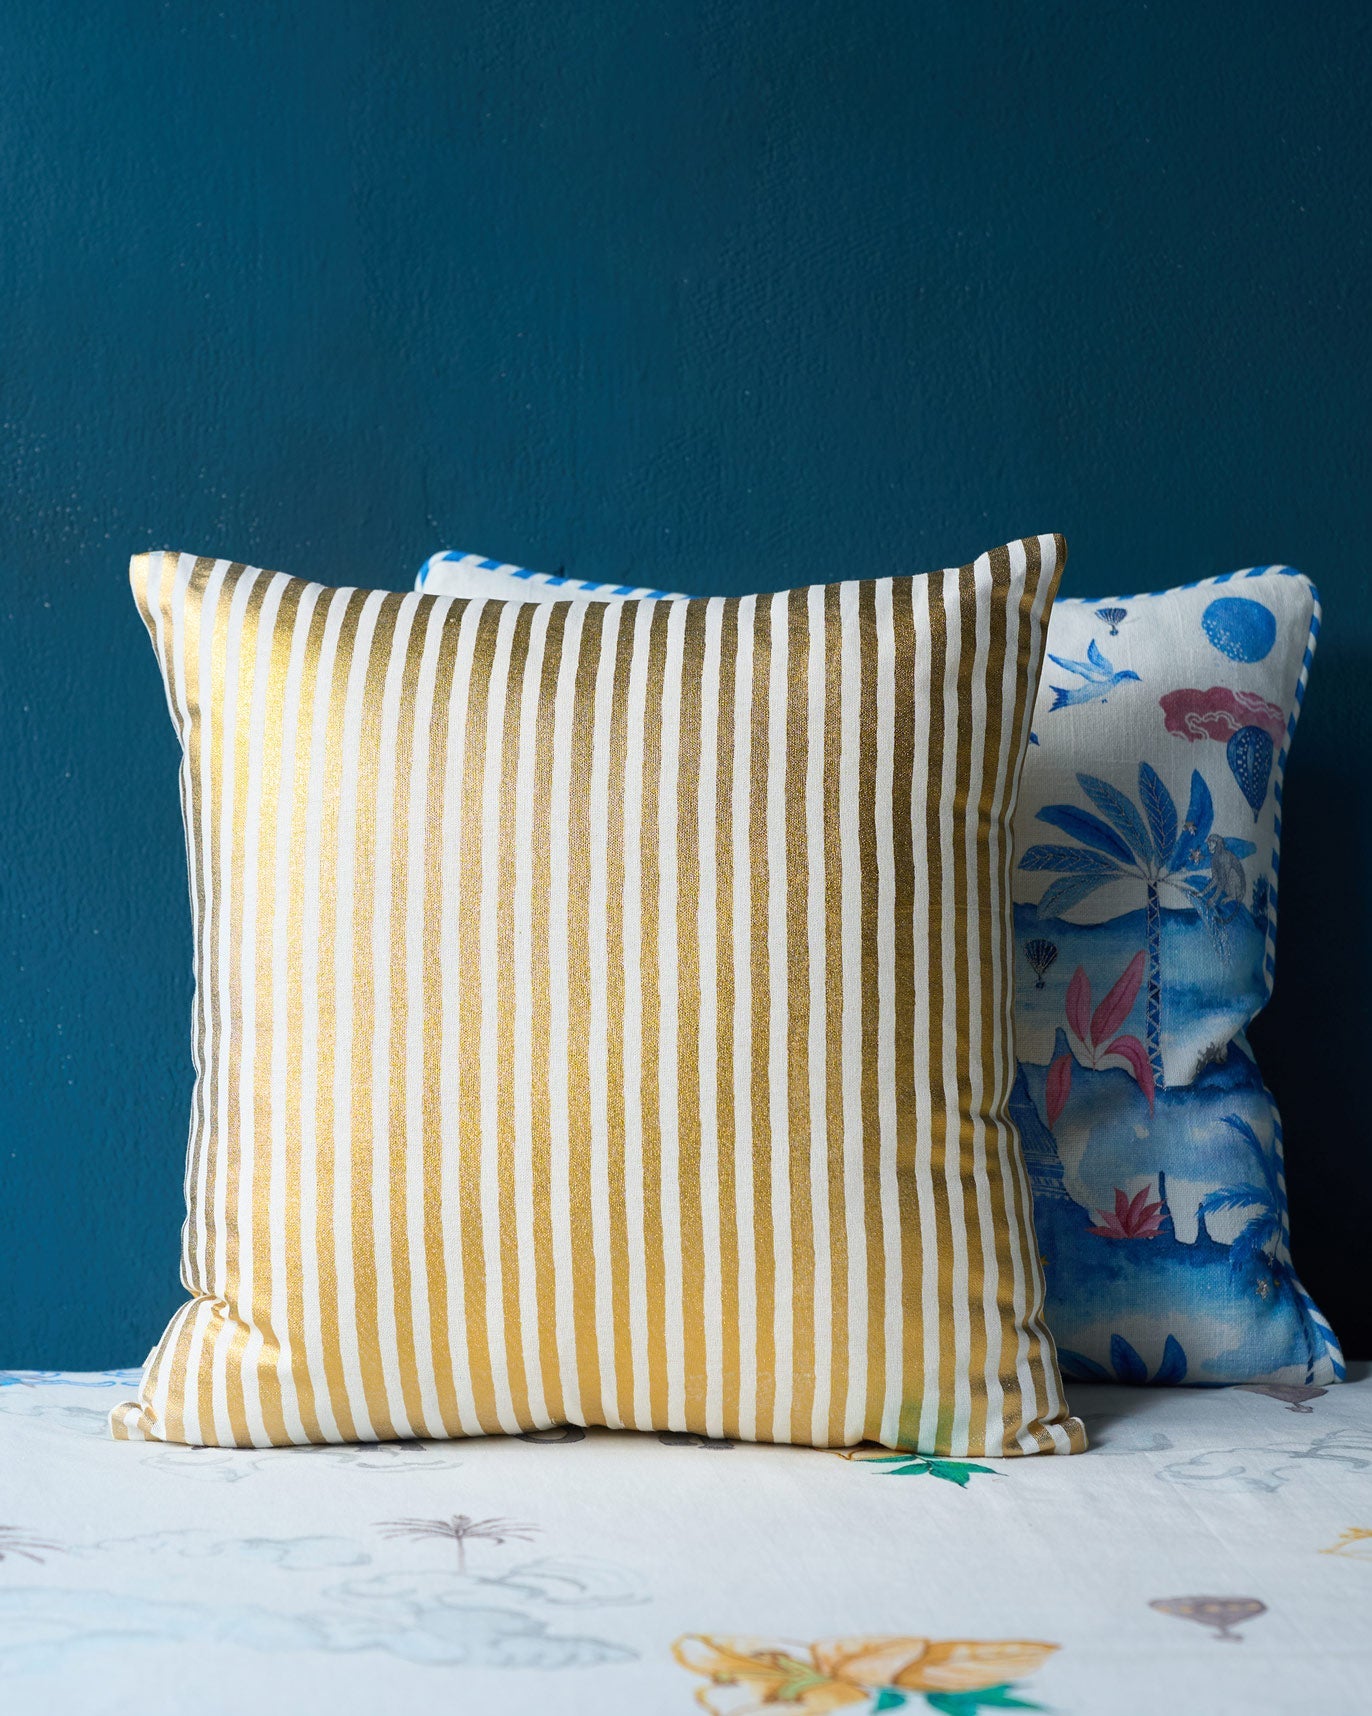 Yellow Golden Palm Cushion Cover - Reversible